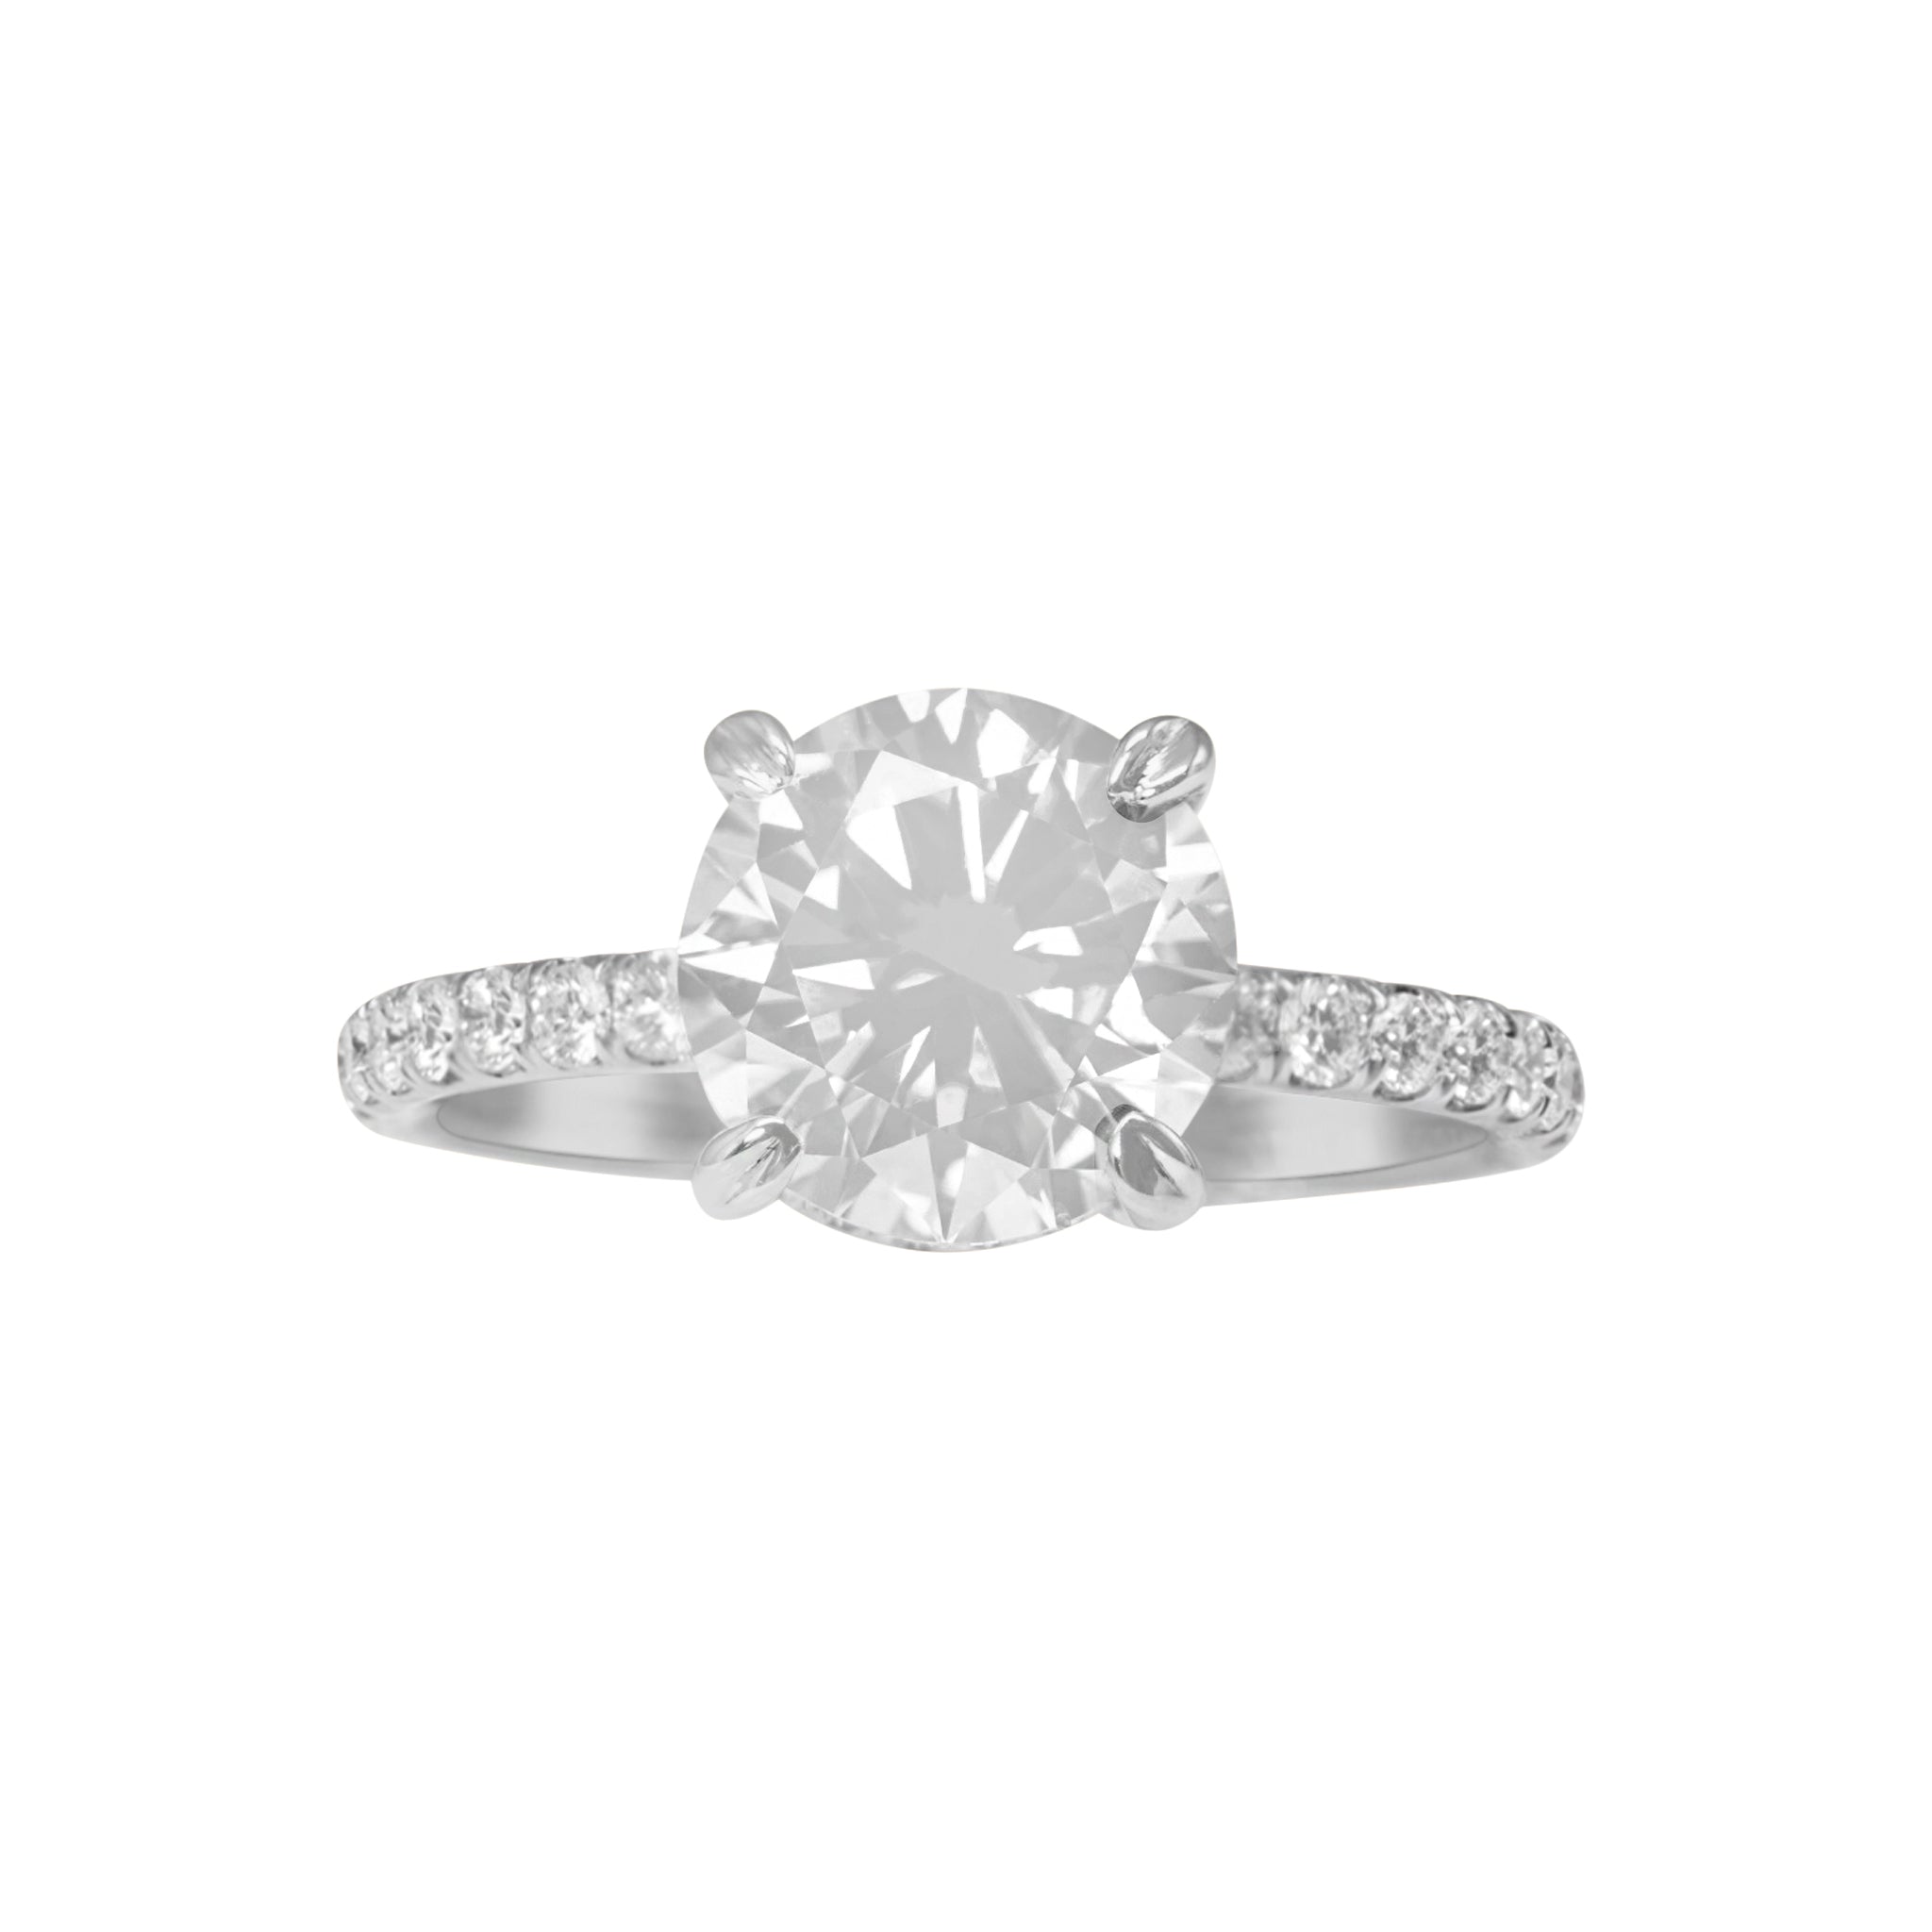 Classic Pave Engagement Ring with Diamond Basket & Prongs